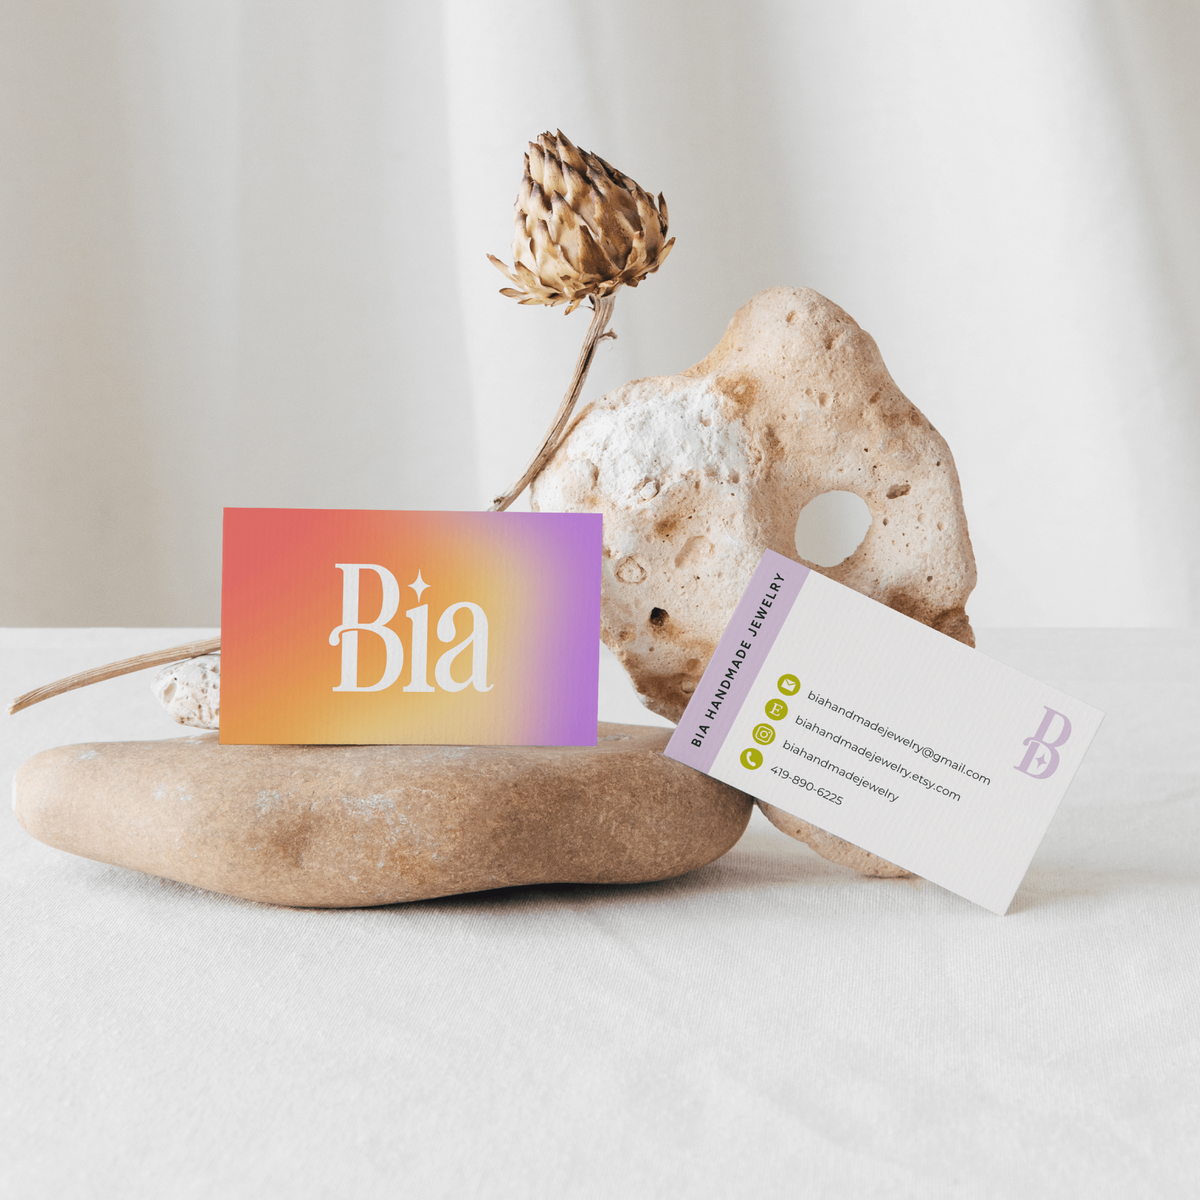 Colorful and bold business card for jewelry brand